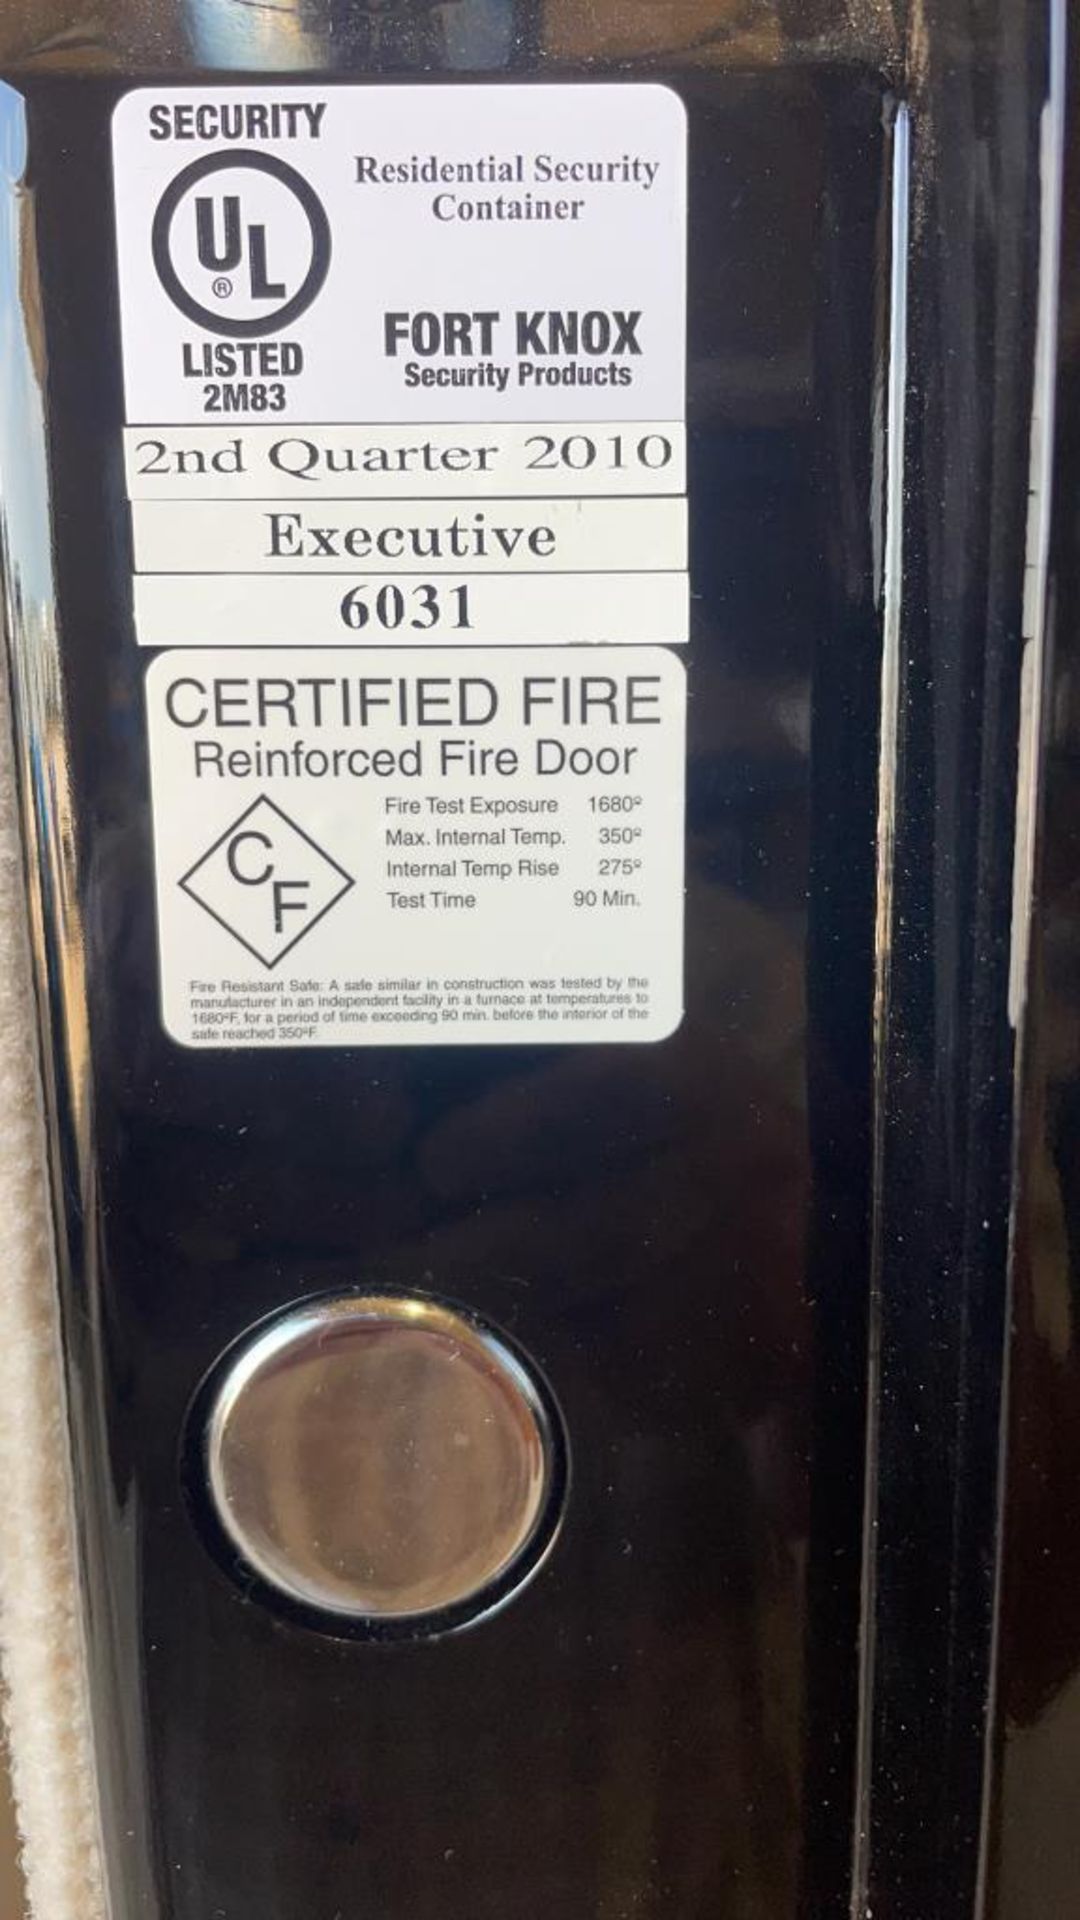 Fort Knox Fire rated Gun safe - Image 11 of 12